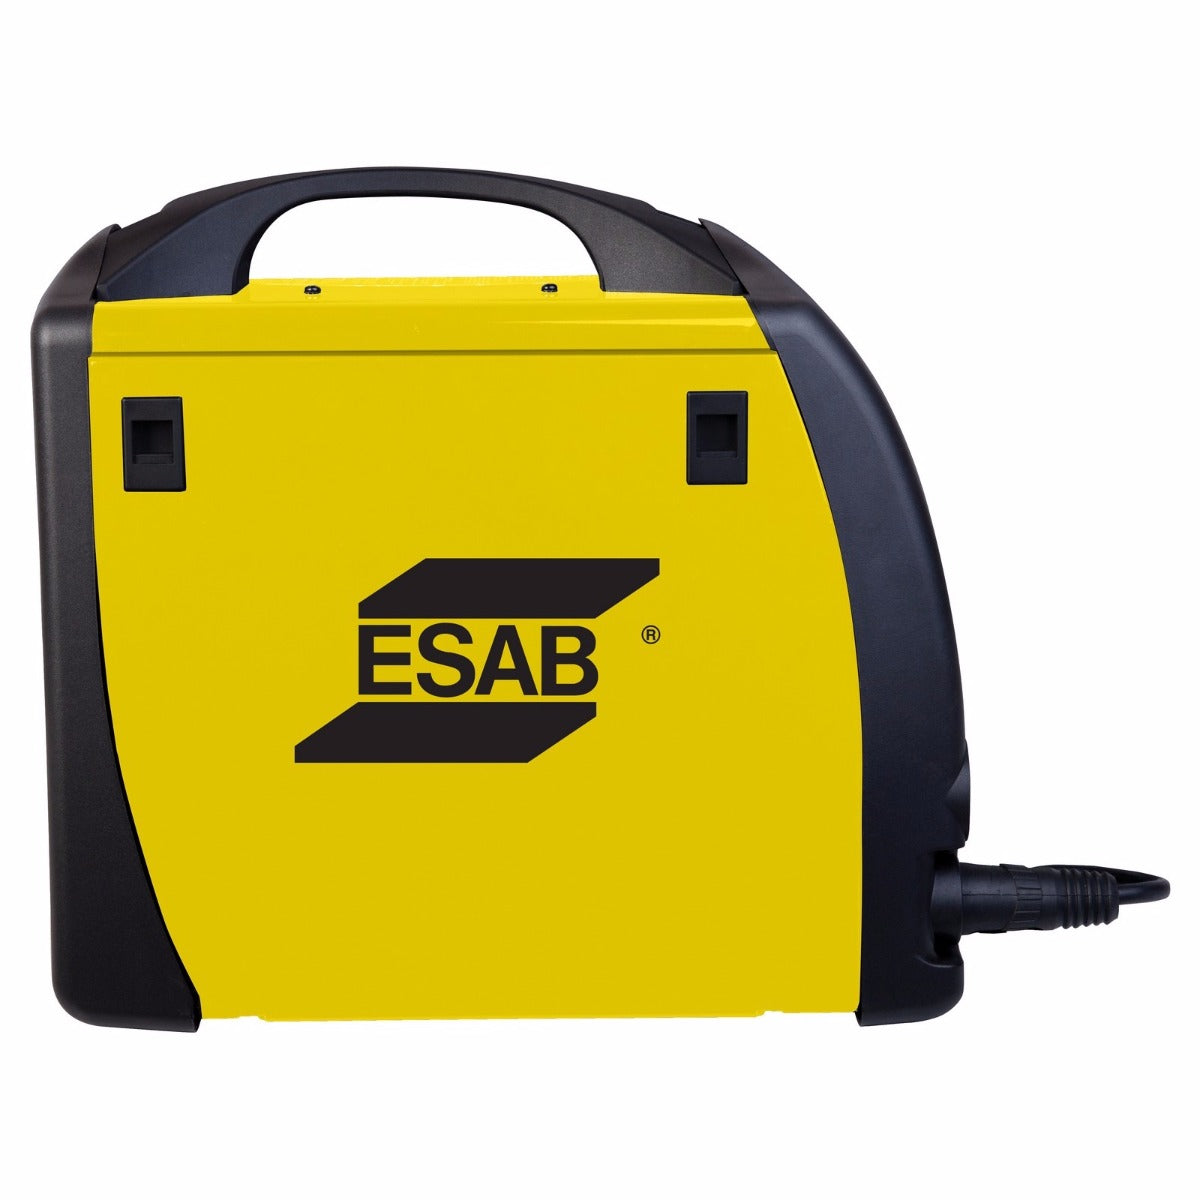 ESAB Fabricator 141i Multi Process Welding System, TIG Torch, and Foot Control (W1003141)